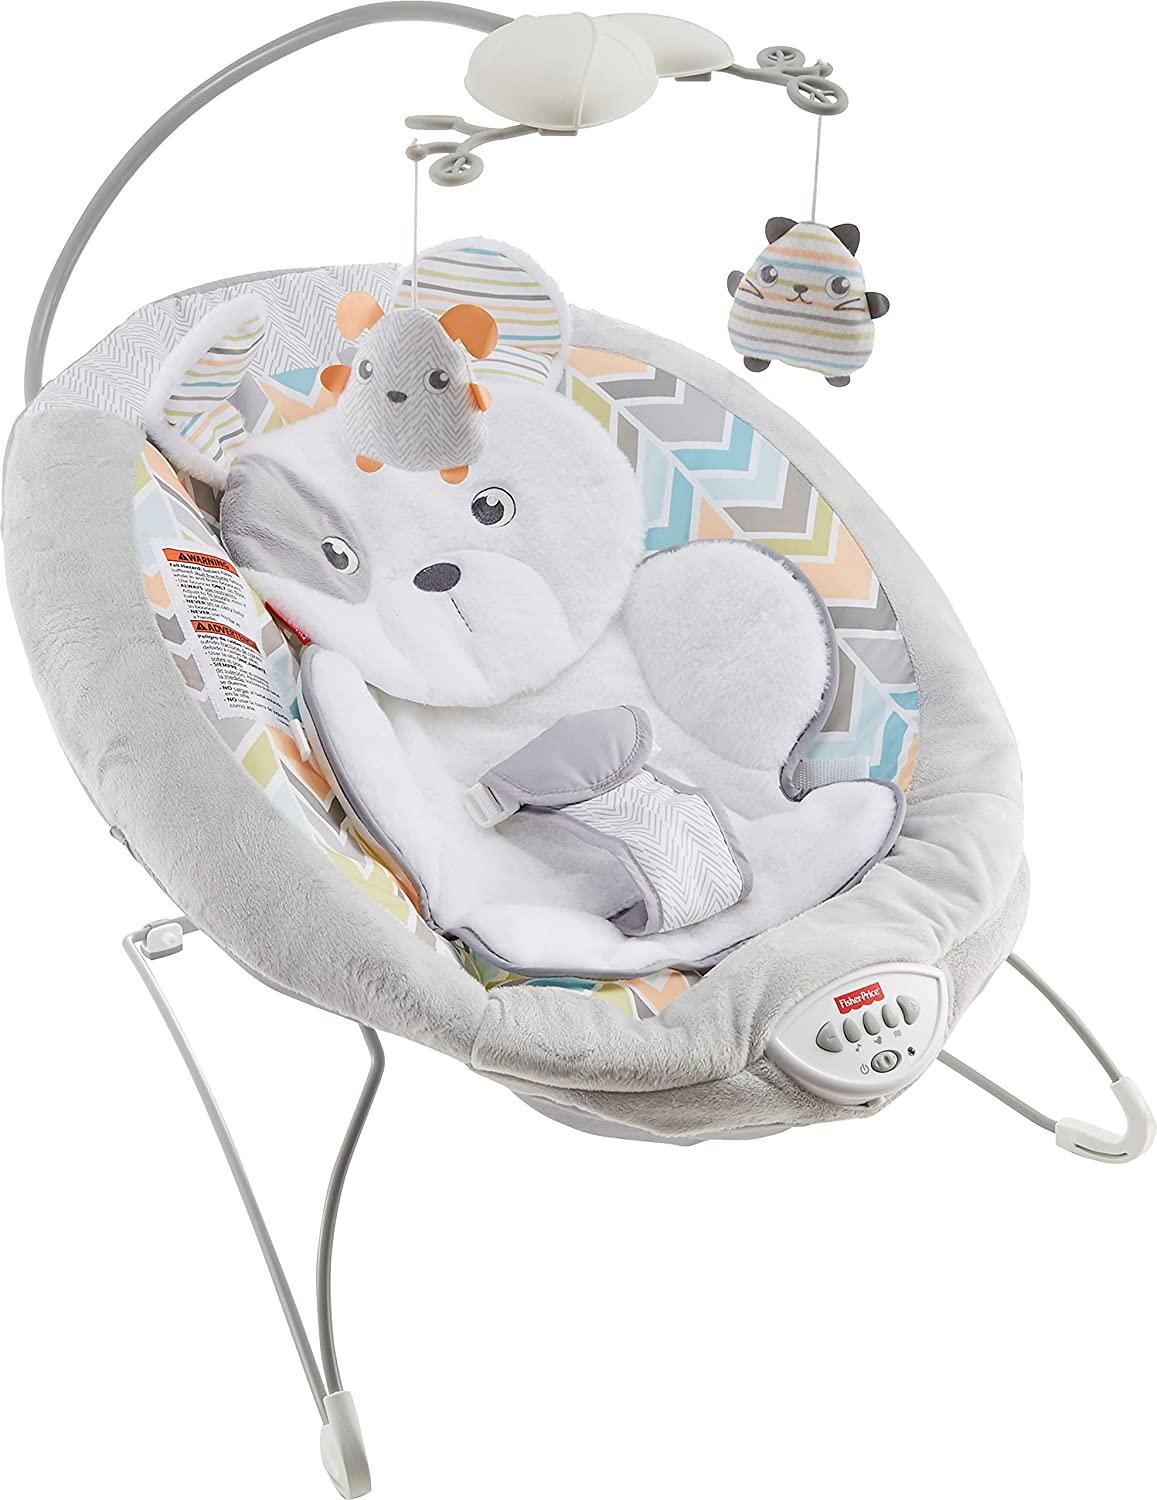 Fisher-Price Sweet Snugapuppy Deluxe Bouncer - with Overhead Mobile, Music, and Calming Vibrations